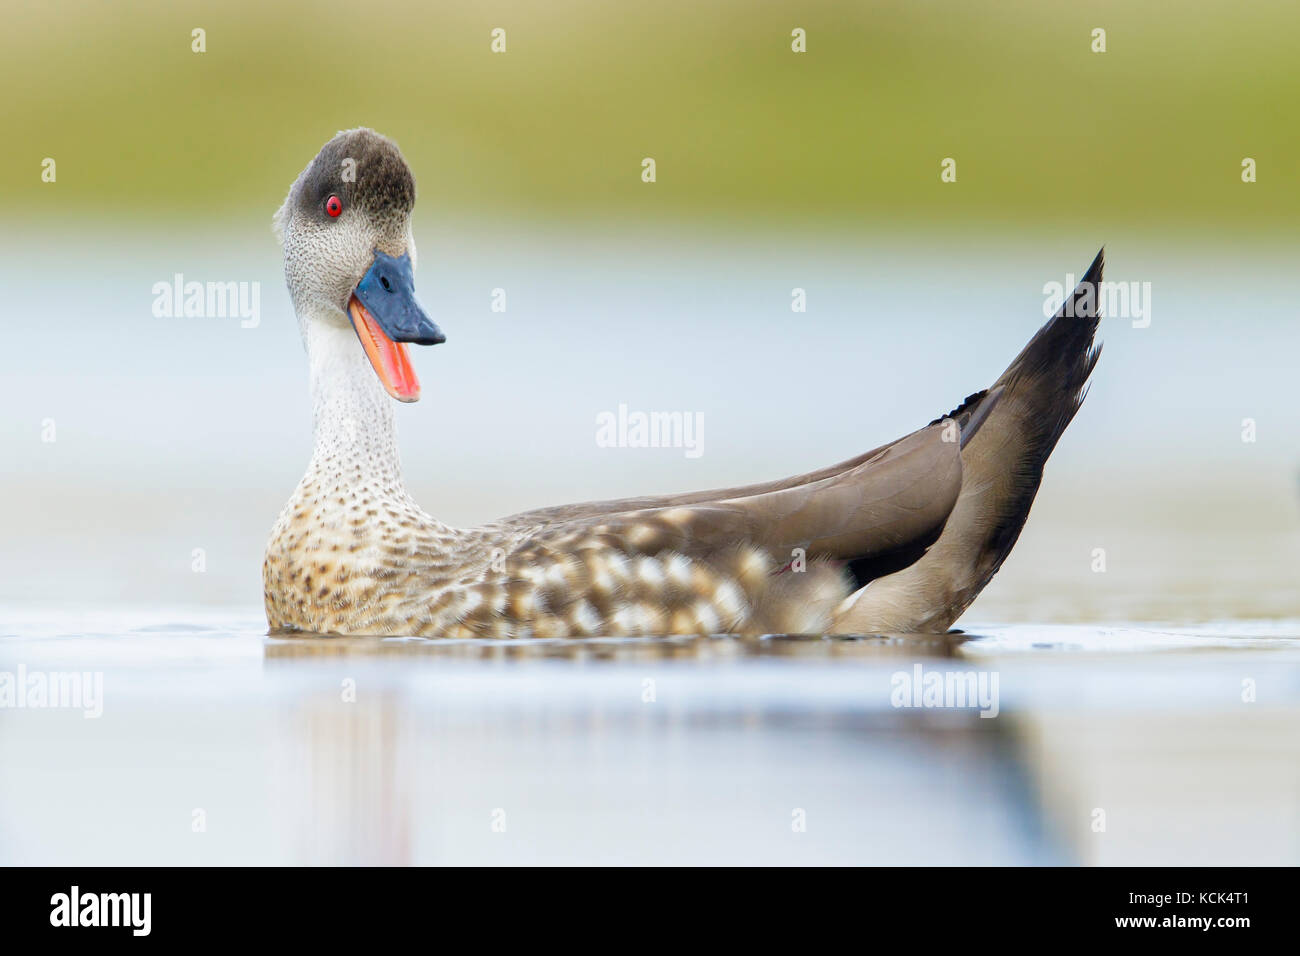 Patagonian Crested Duck (Lophonetta specularioides) on a small pond in the Falkland Islands. Stock Photo